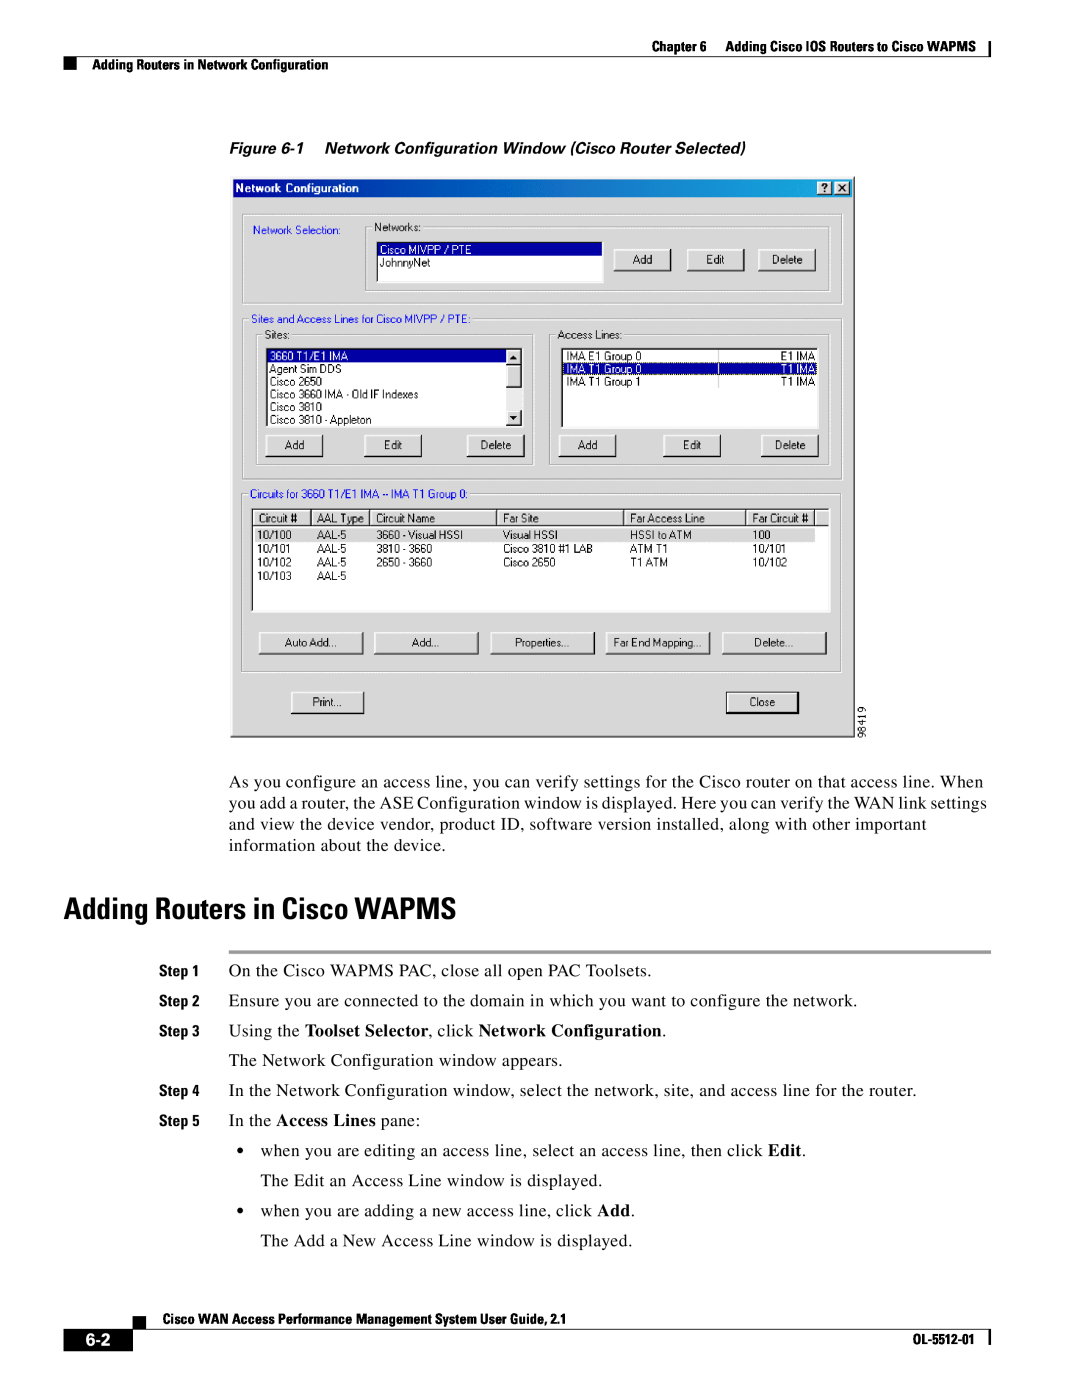 Cisco Systems OL-5512-01 manual Adding Routers in Cisco WAPMS 